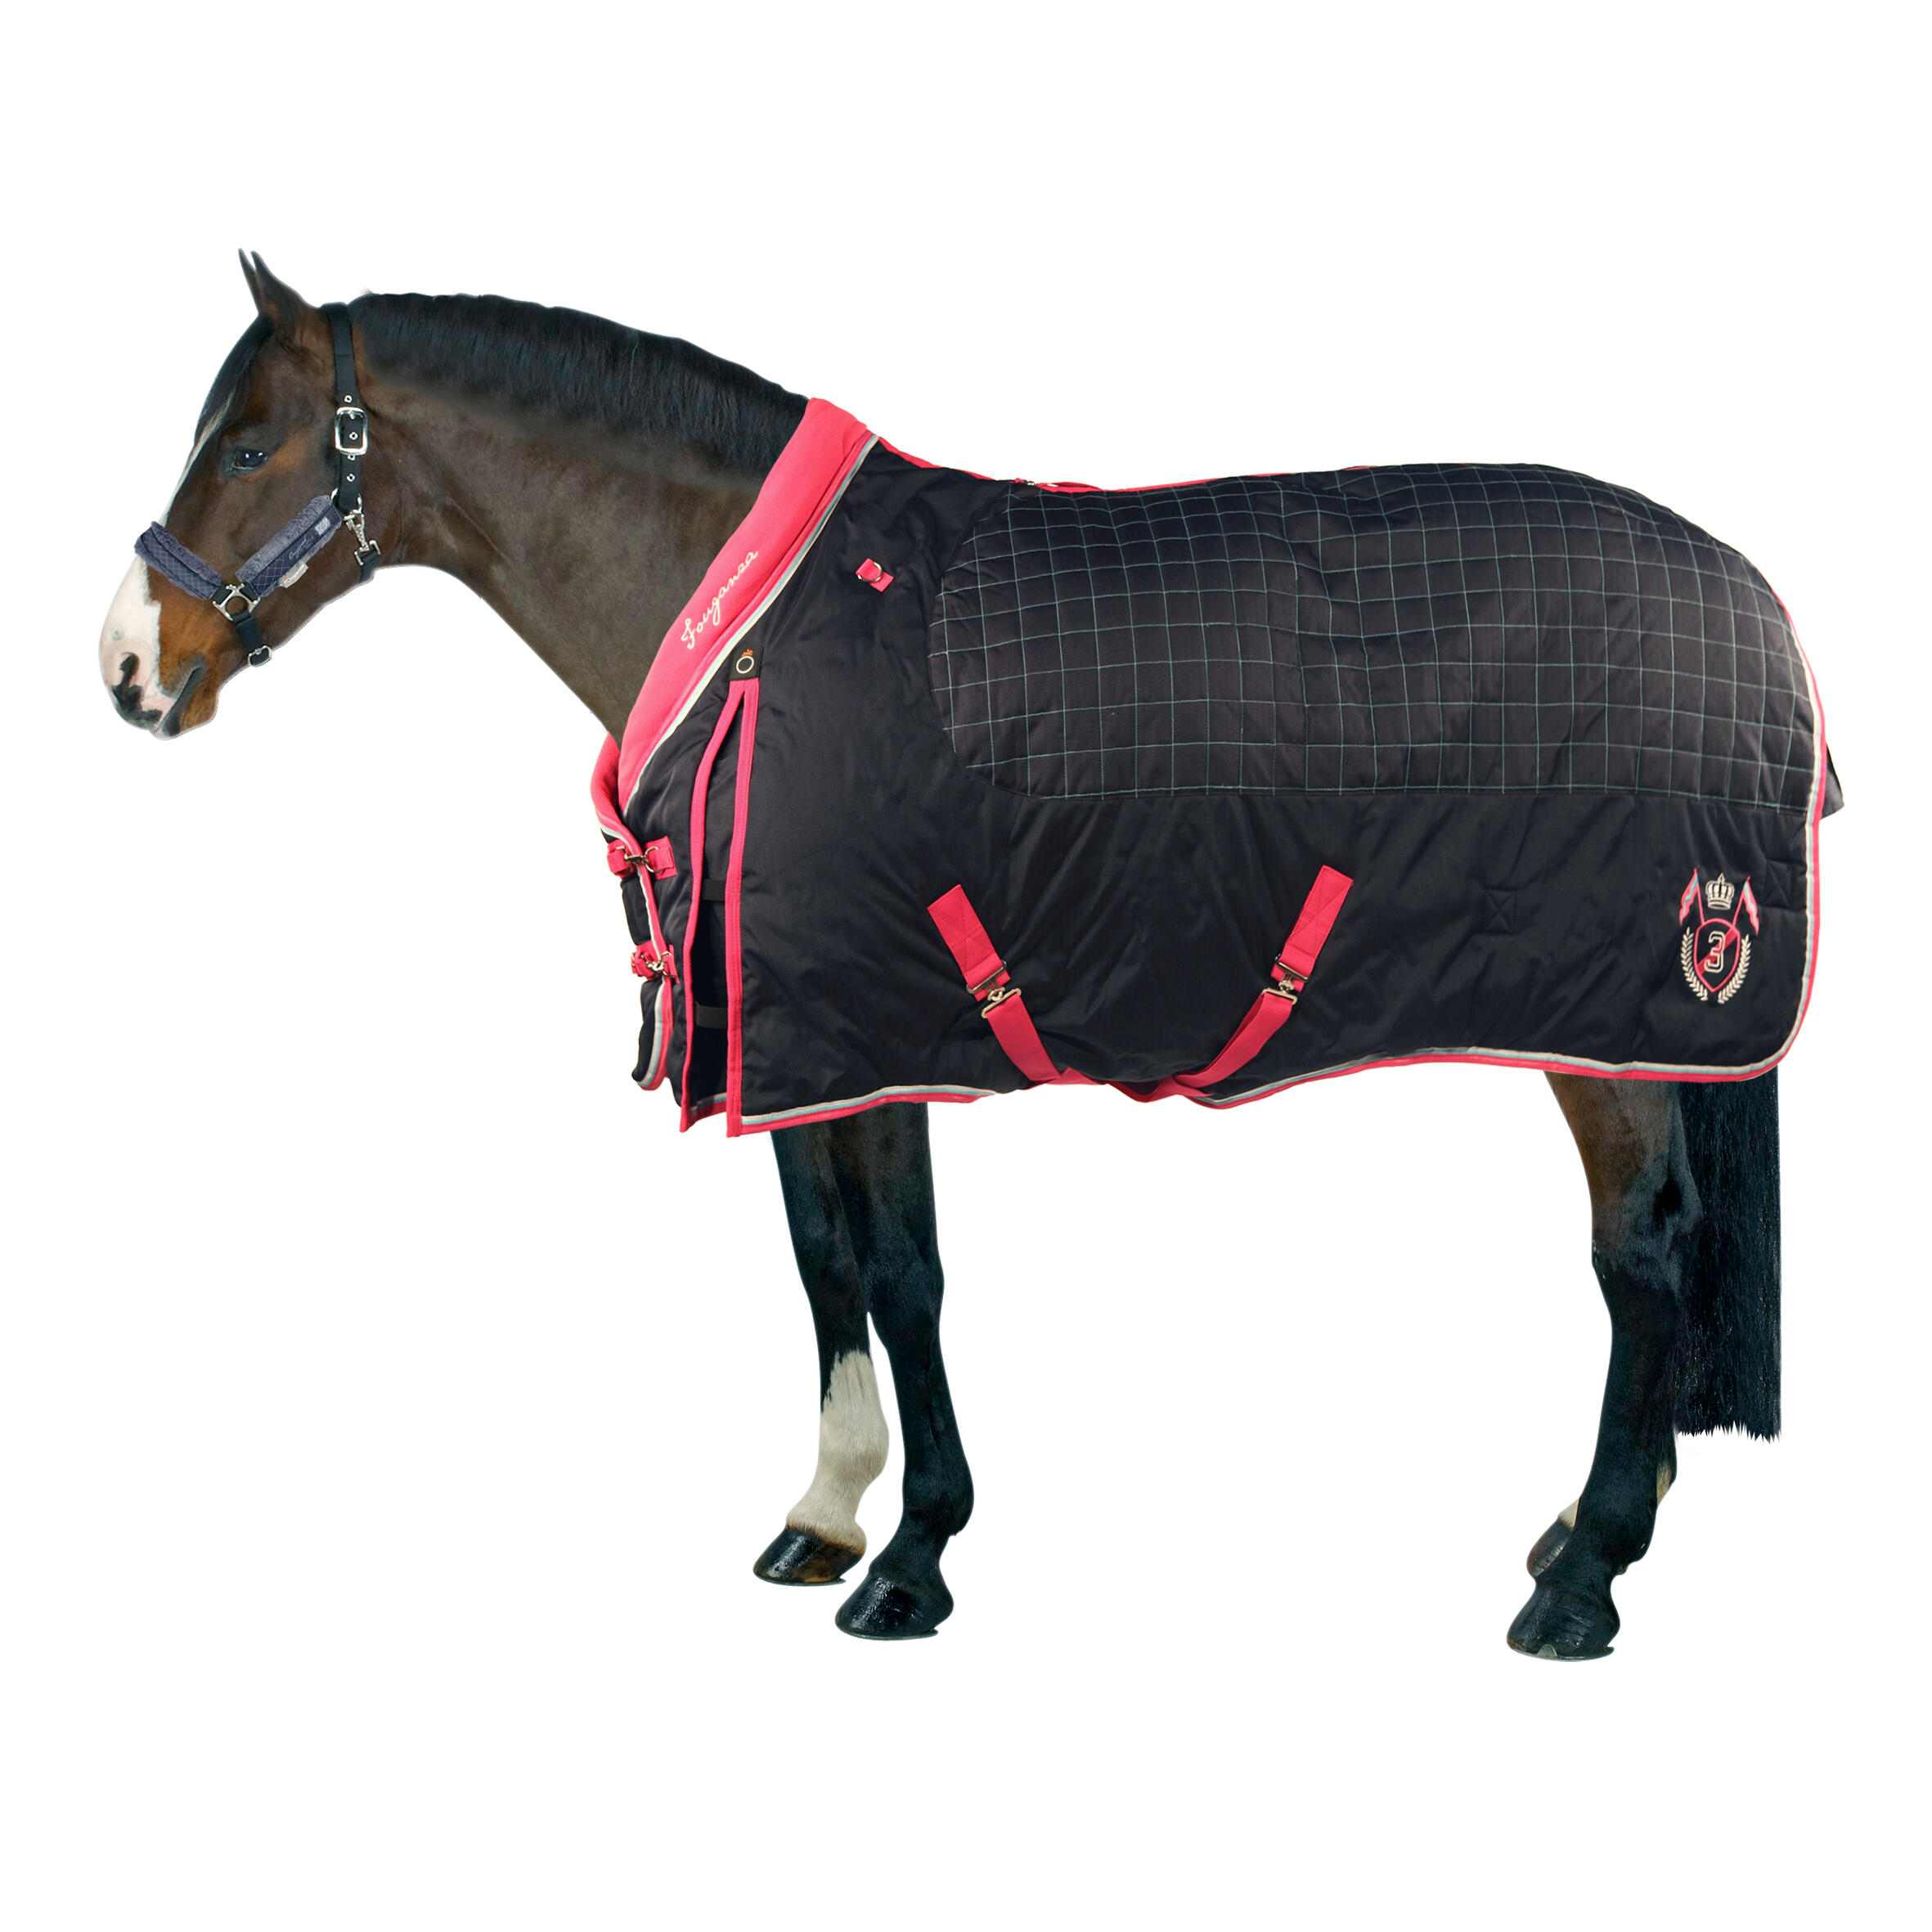 FOUGANZA STABLE 400 "3" horse riding stable rug for horse or pony - navy/pink